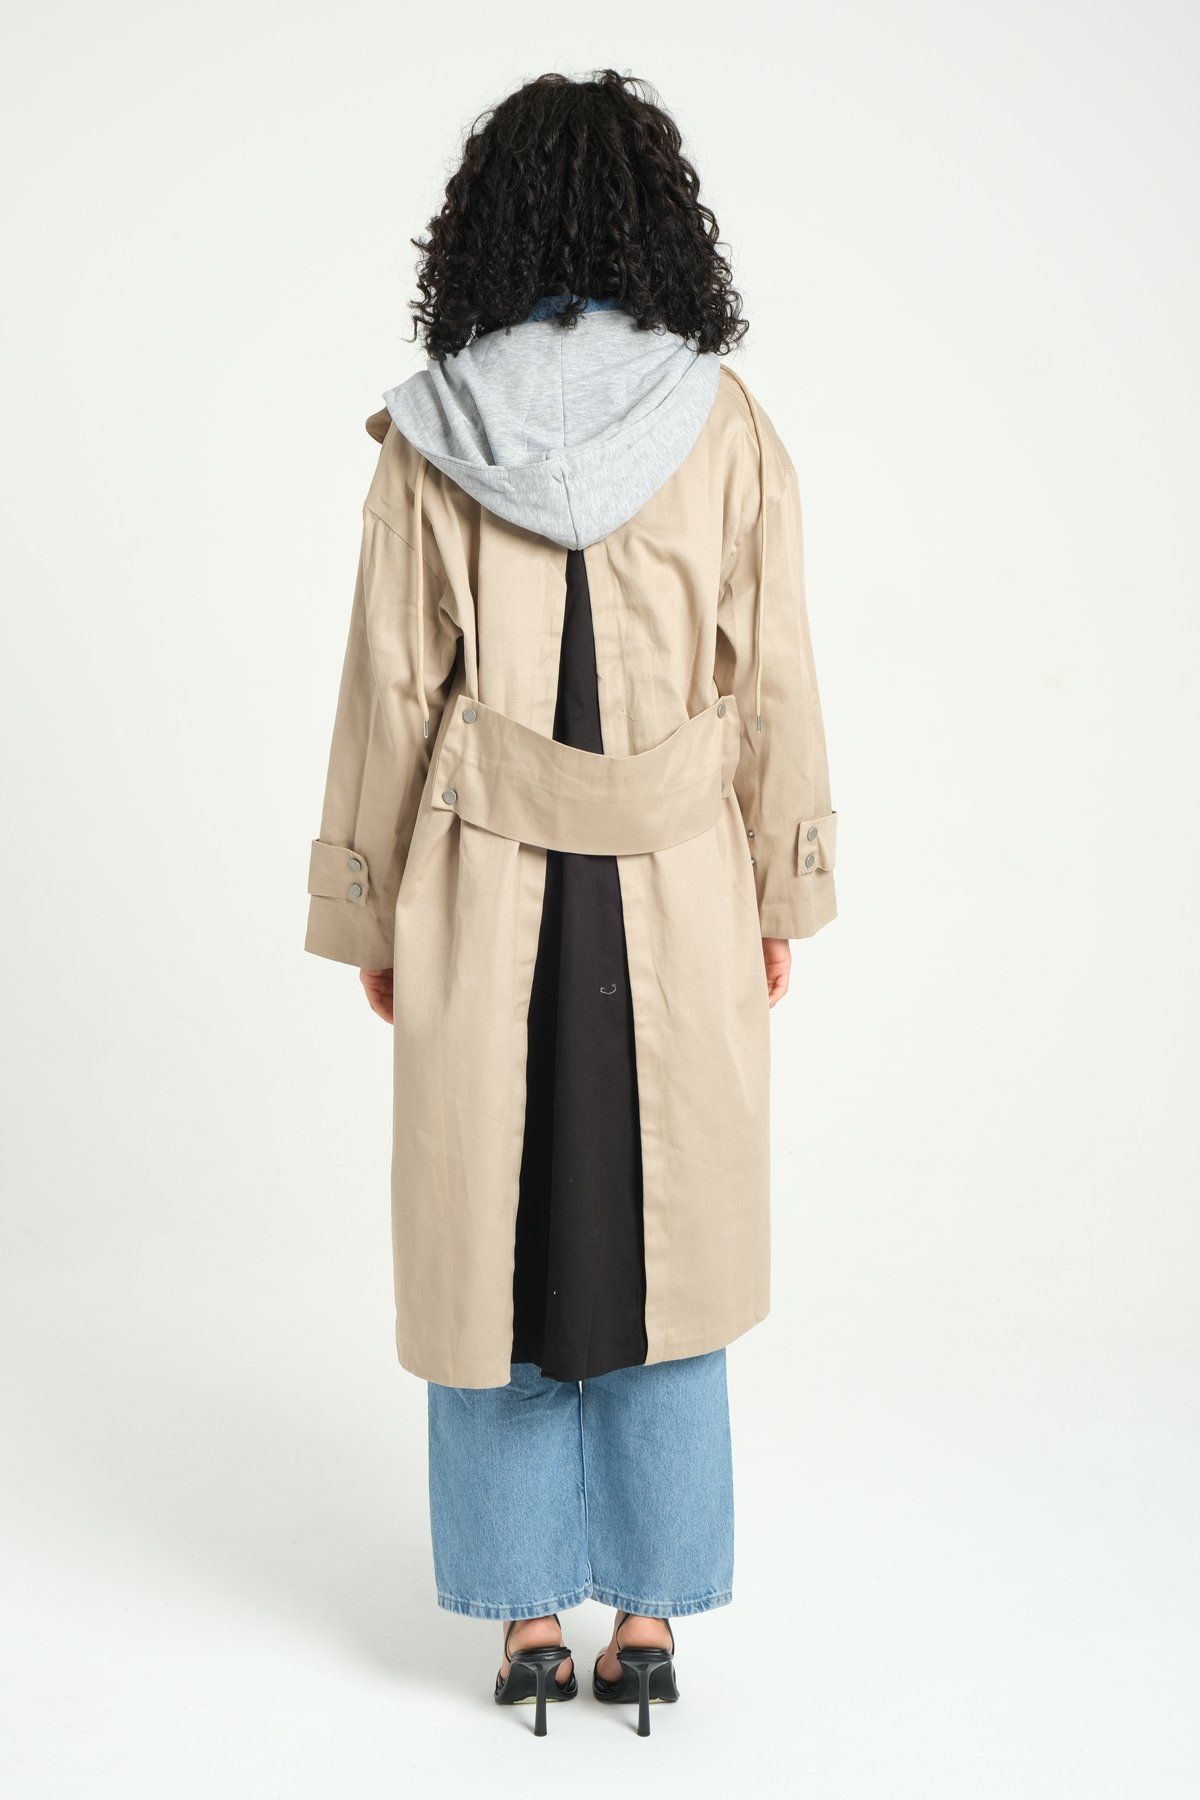 Collar Patchy Hooded Trenchcoat with a Back Detail